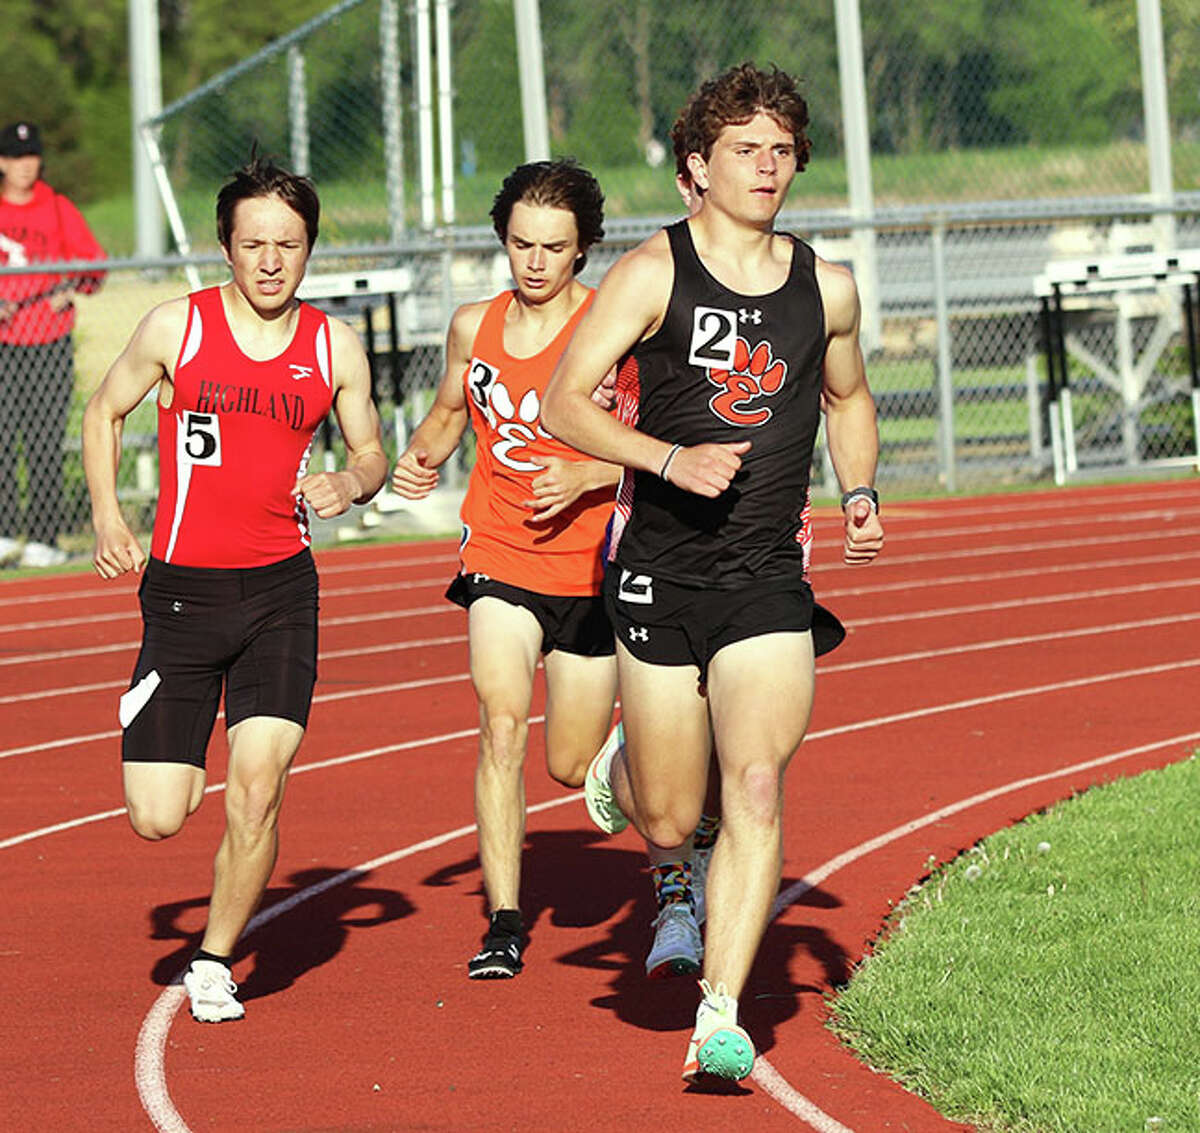 Edwardsville's Ryan Luitjohan (right) leads Highland's Dallas Mancinas (left) and Edwardsville's Hugh Davis through the turn in the 1,600 meters on Tuesday at the Madison County large-schools boys track meet at Edwardsville.